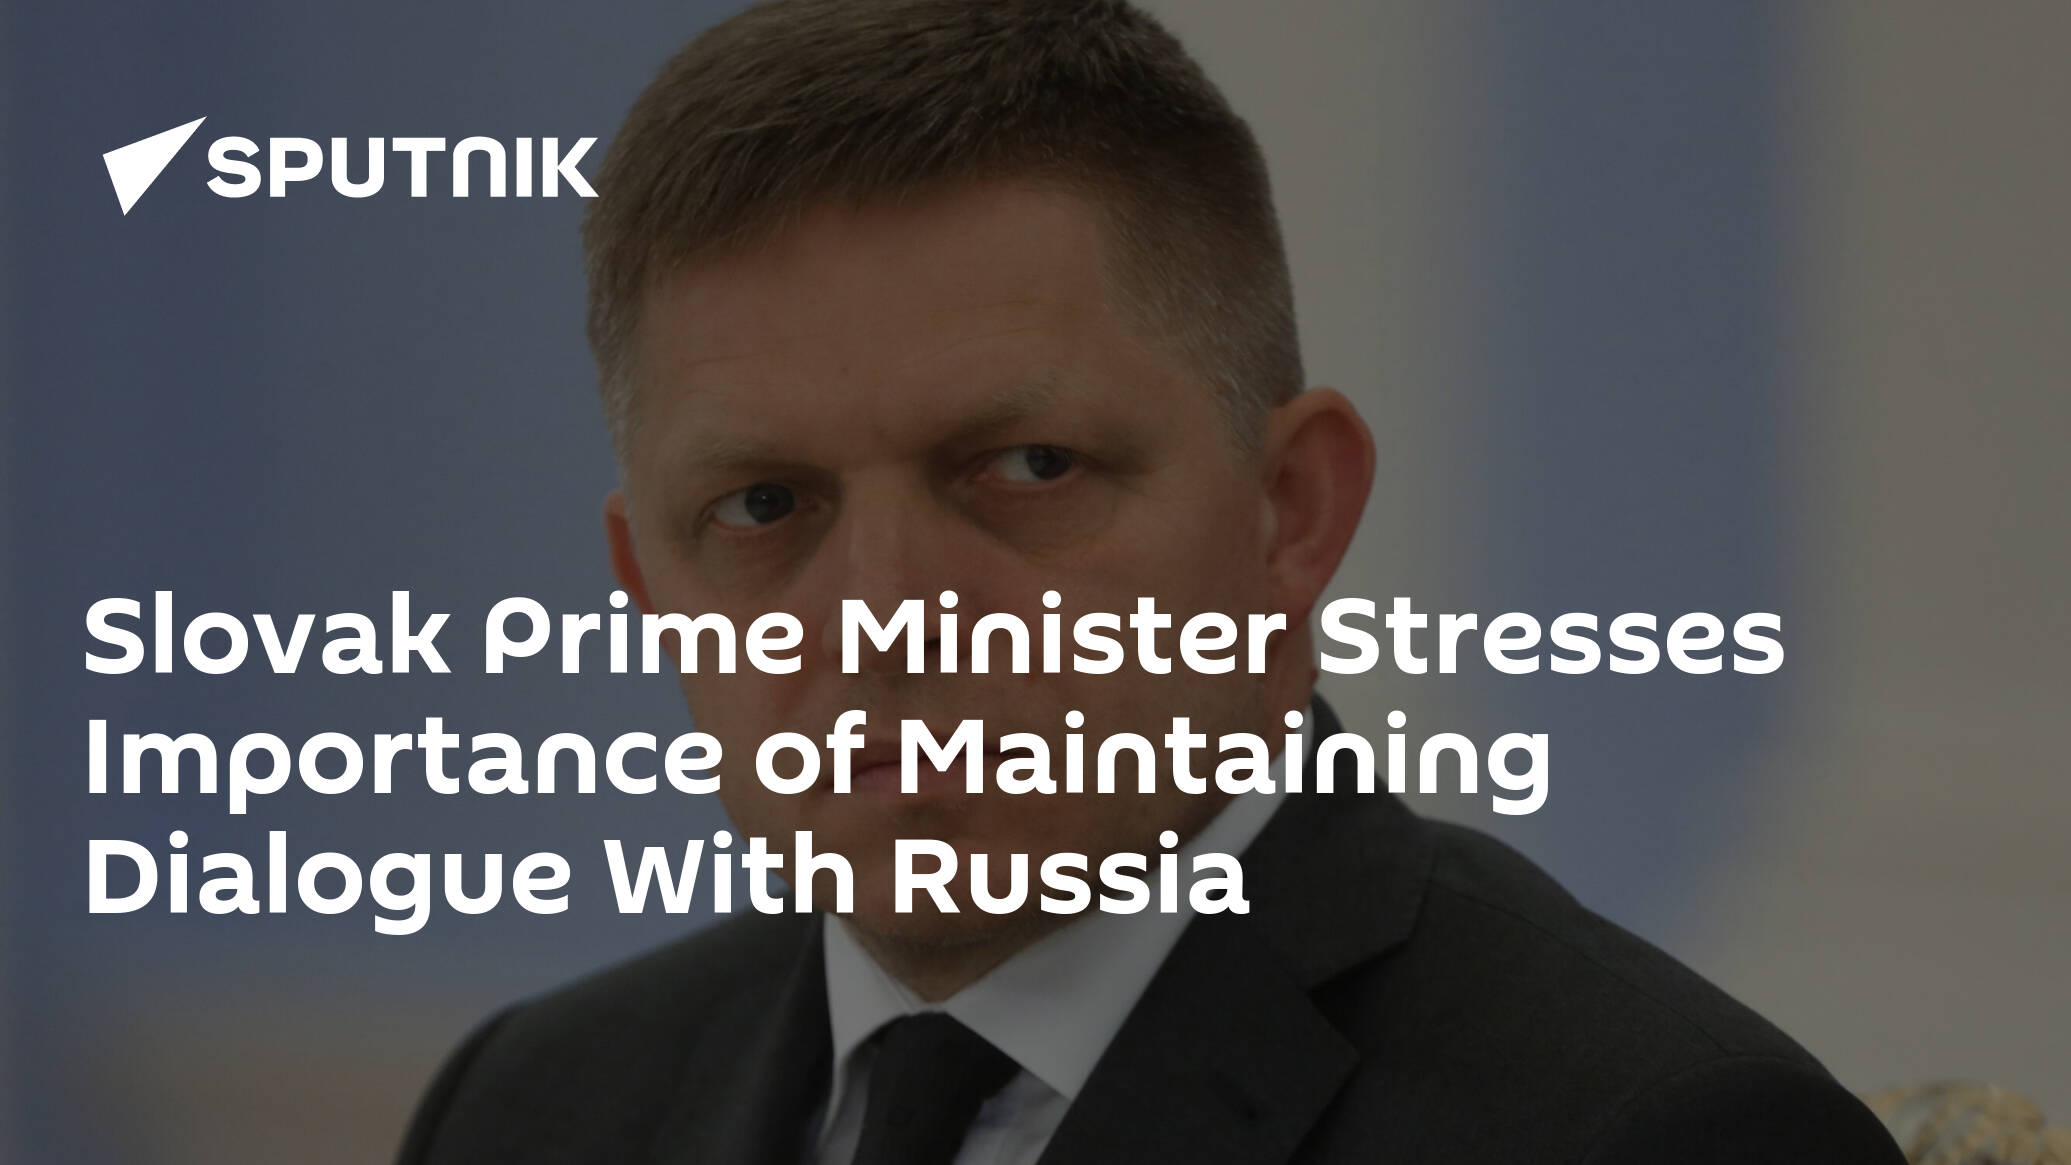 Slovak Prime Minister Stresses Importance of Maintaining Dialogue With Russia